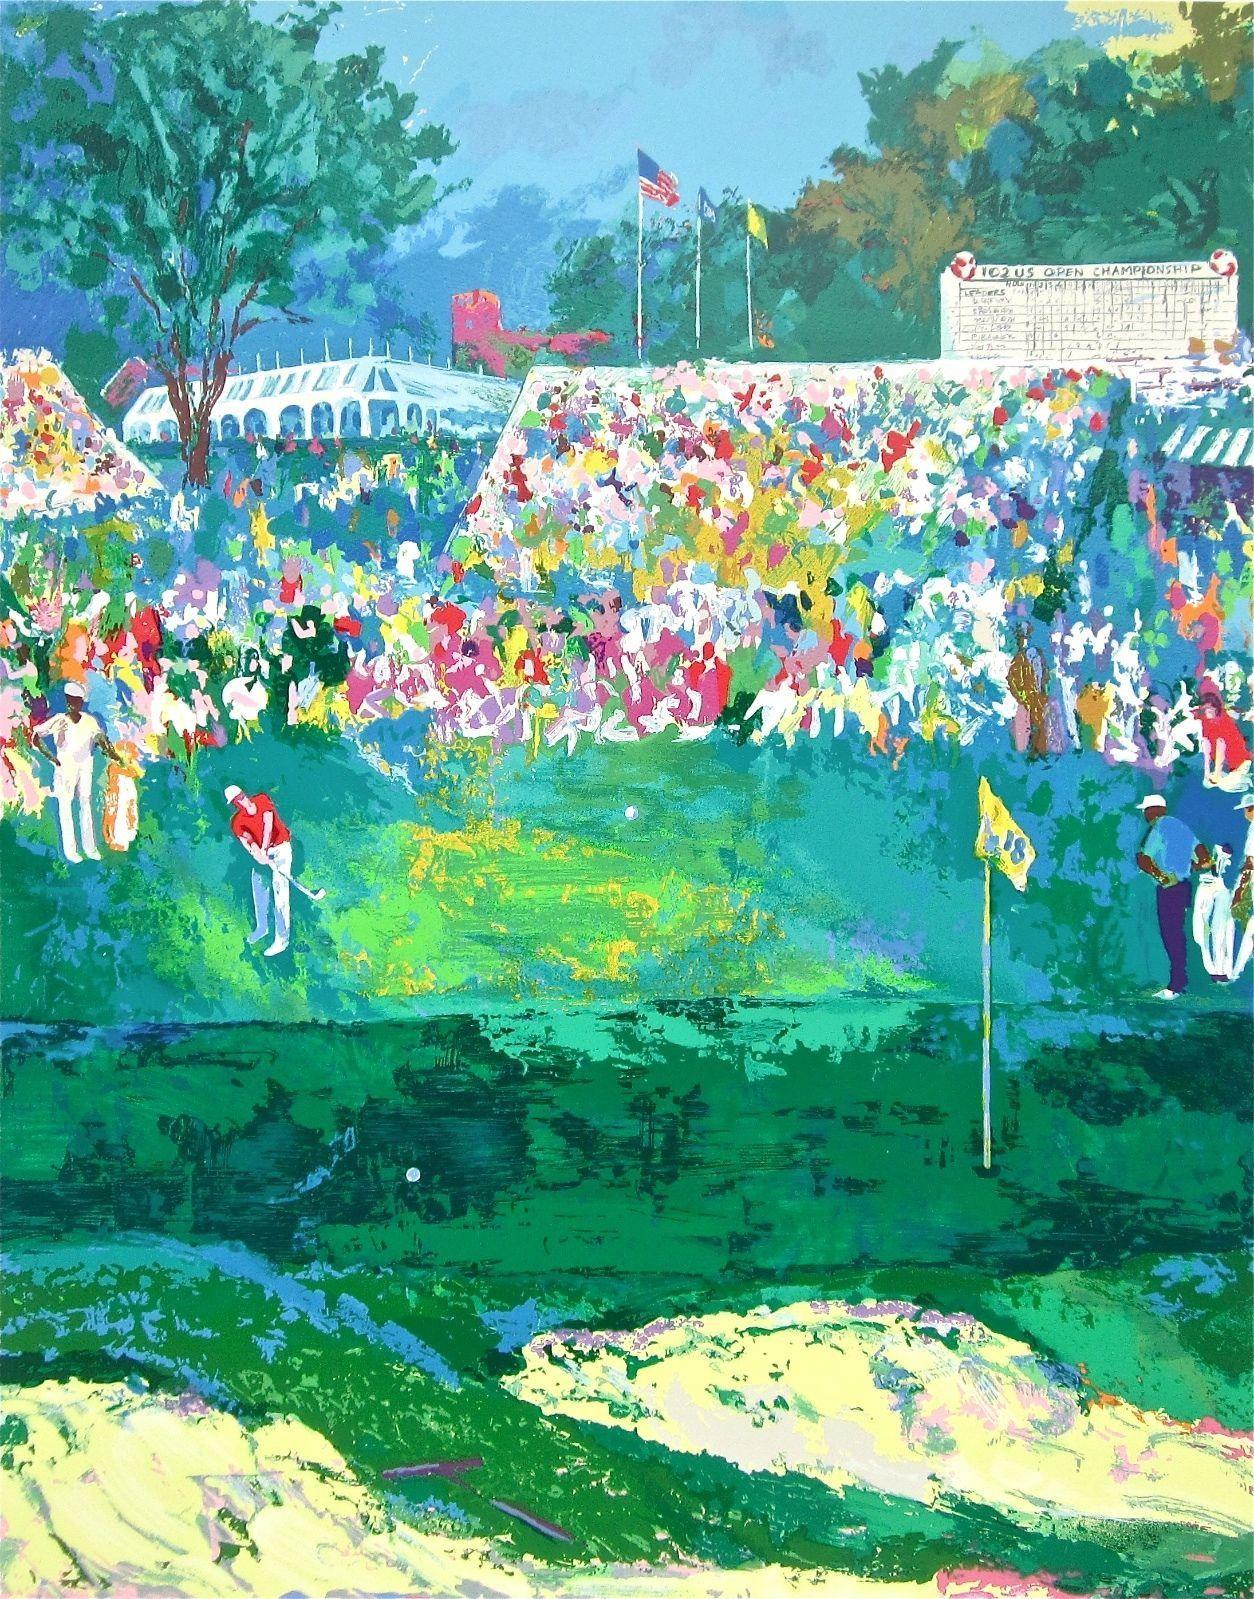 Artist:         Leroy Neiman

Title:           Bethpage Black Course, 2002 US Open

Dimensions: 35.25" x 28

Medium:     Serigraph

Edition Number:  243/350

Year: 2002

Hand Signed and Numbered Limited Edition

Condition:  Artwork in excellent